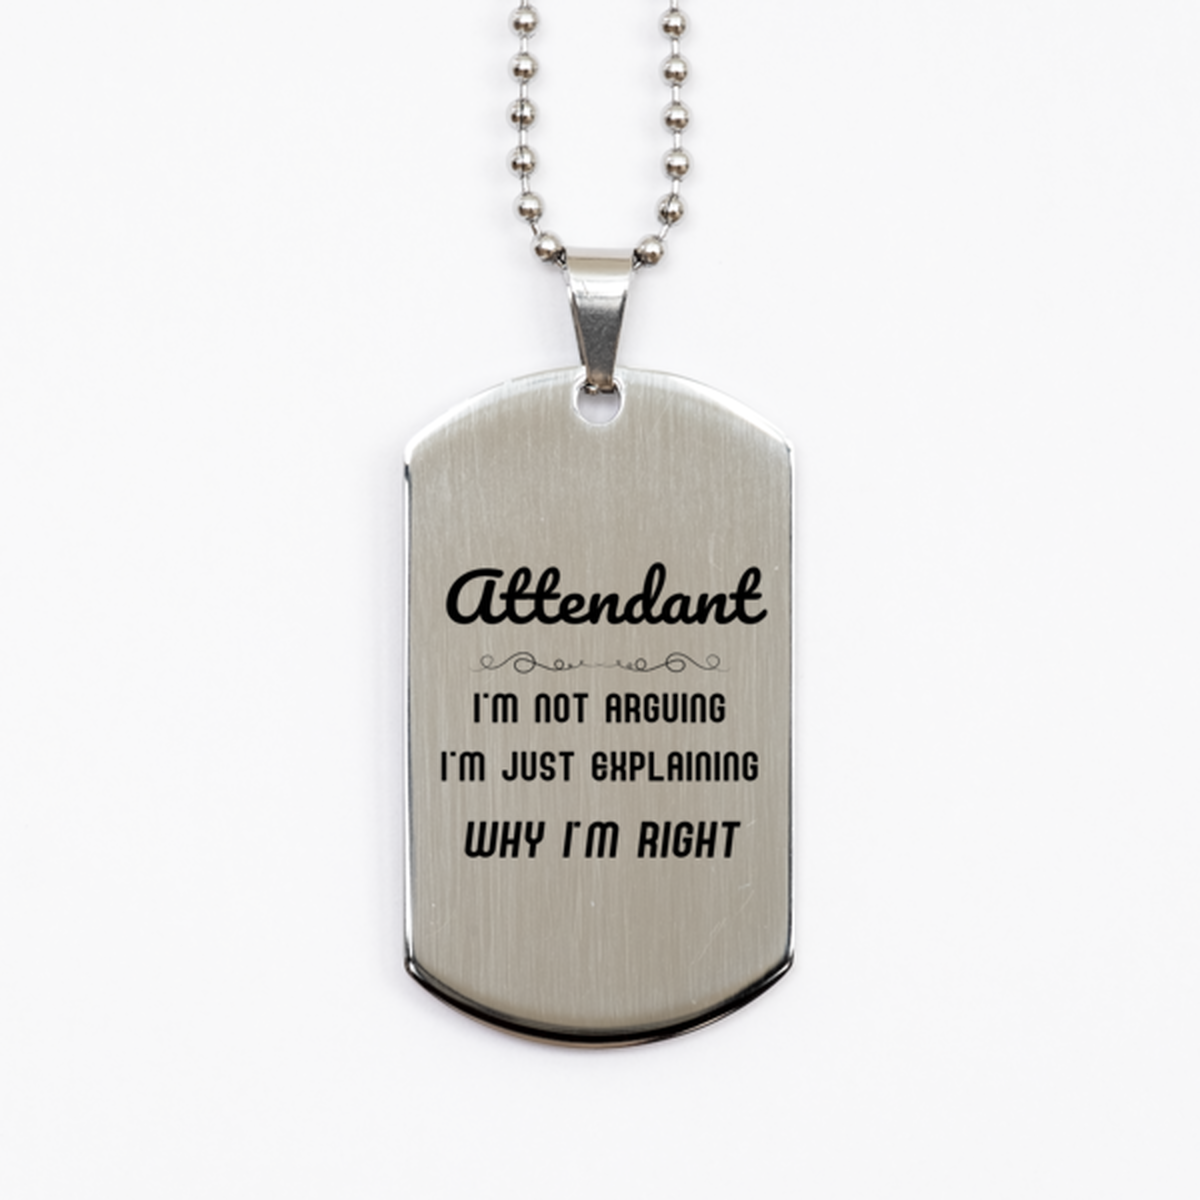 Attendant I'm not Arguing. I'm Just Explaining Why I'm RIGHT Silver Dog Tag, Funny Saying Quote Attendant Gifts For Attendant Graduation Birthday Christmas Gifts for Men Women Coworker